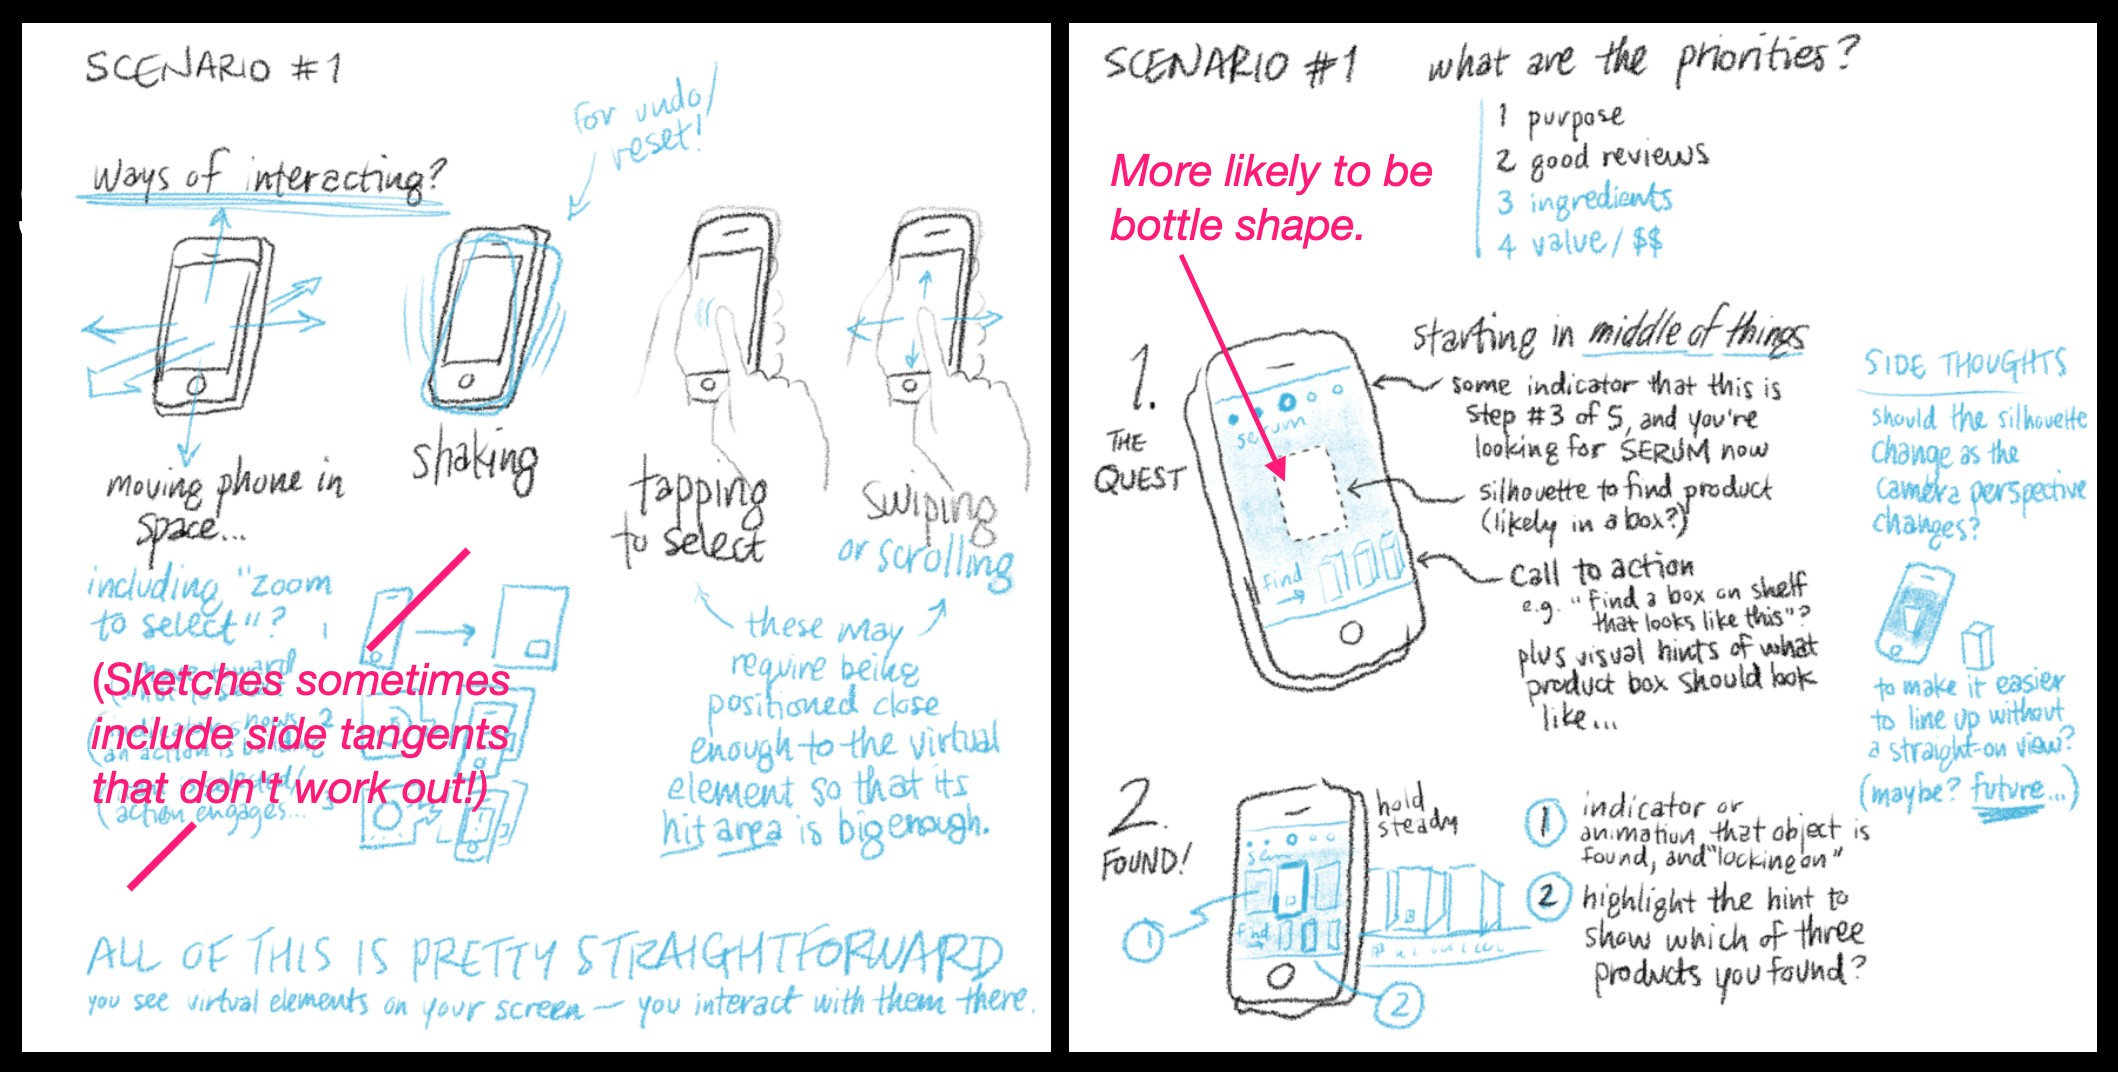 Sketch to illustrate how to differentiate between multiple bottles on a shelf